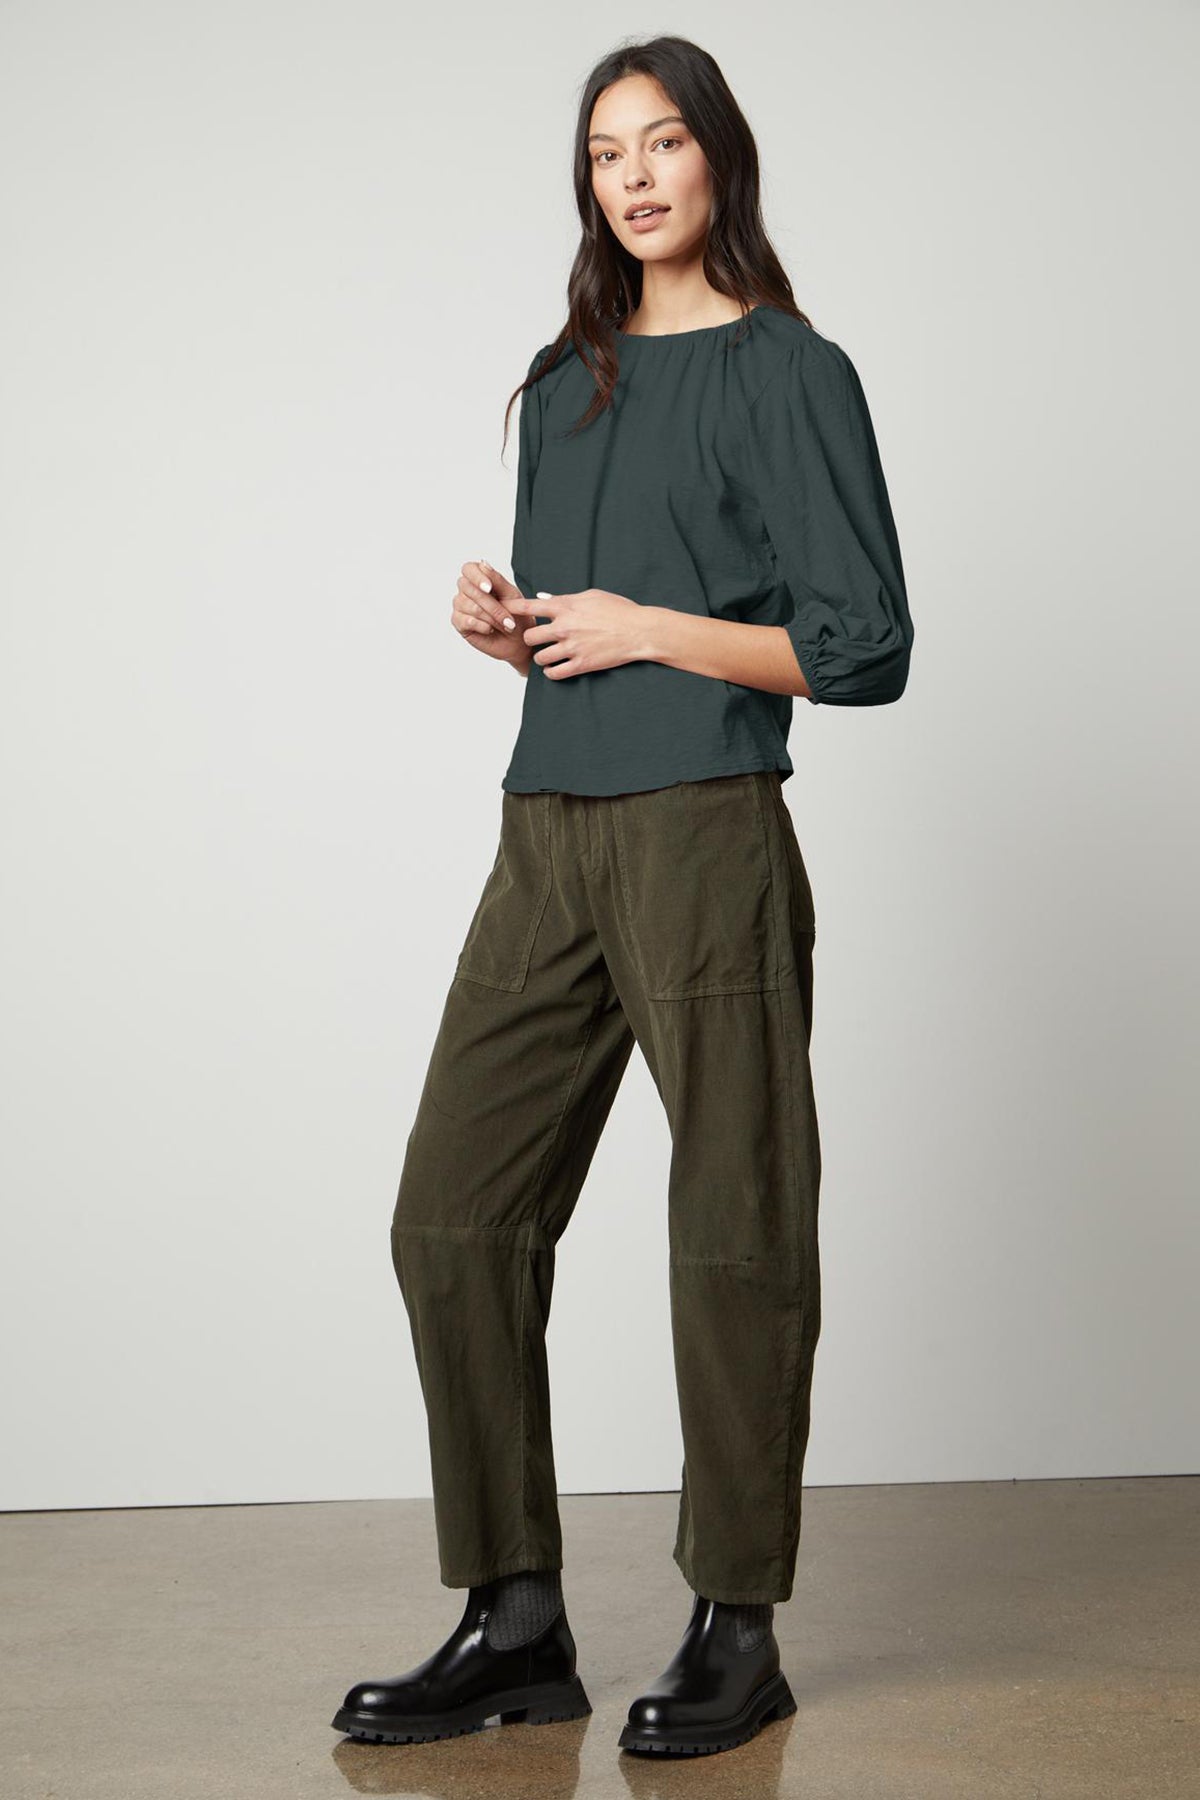 The model is wearing a green SUE CORDUROY PANT with puff sleeves.-26799935029441